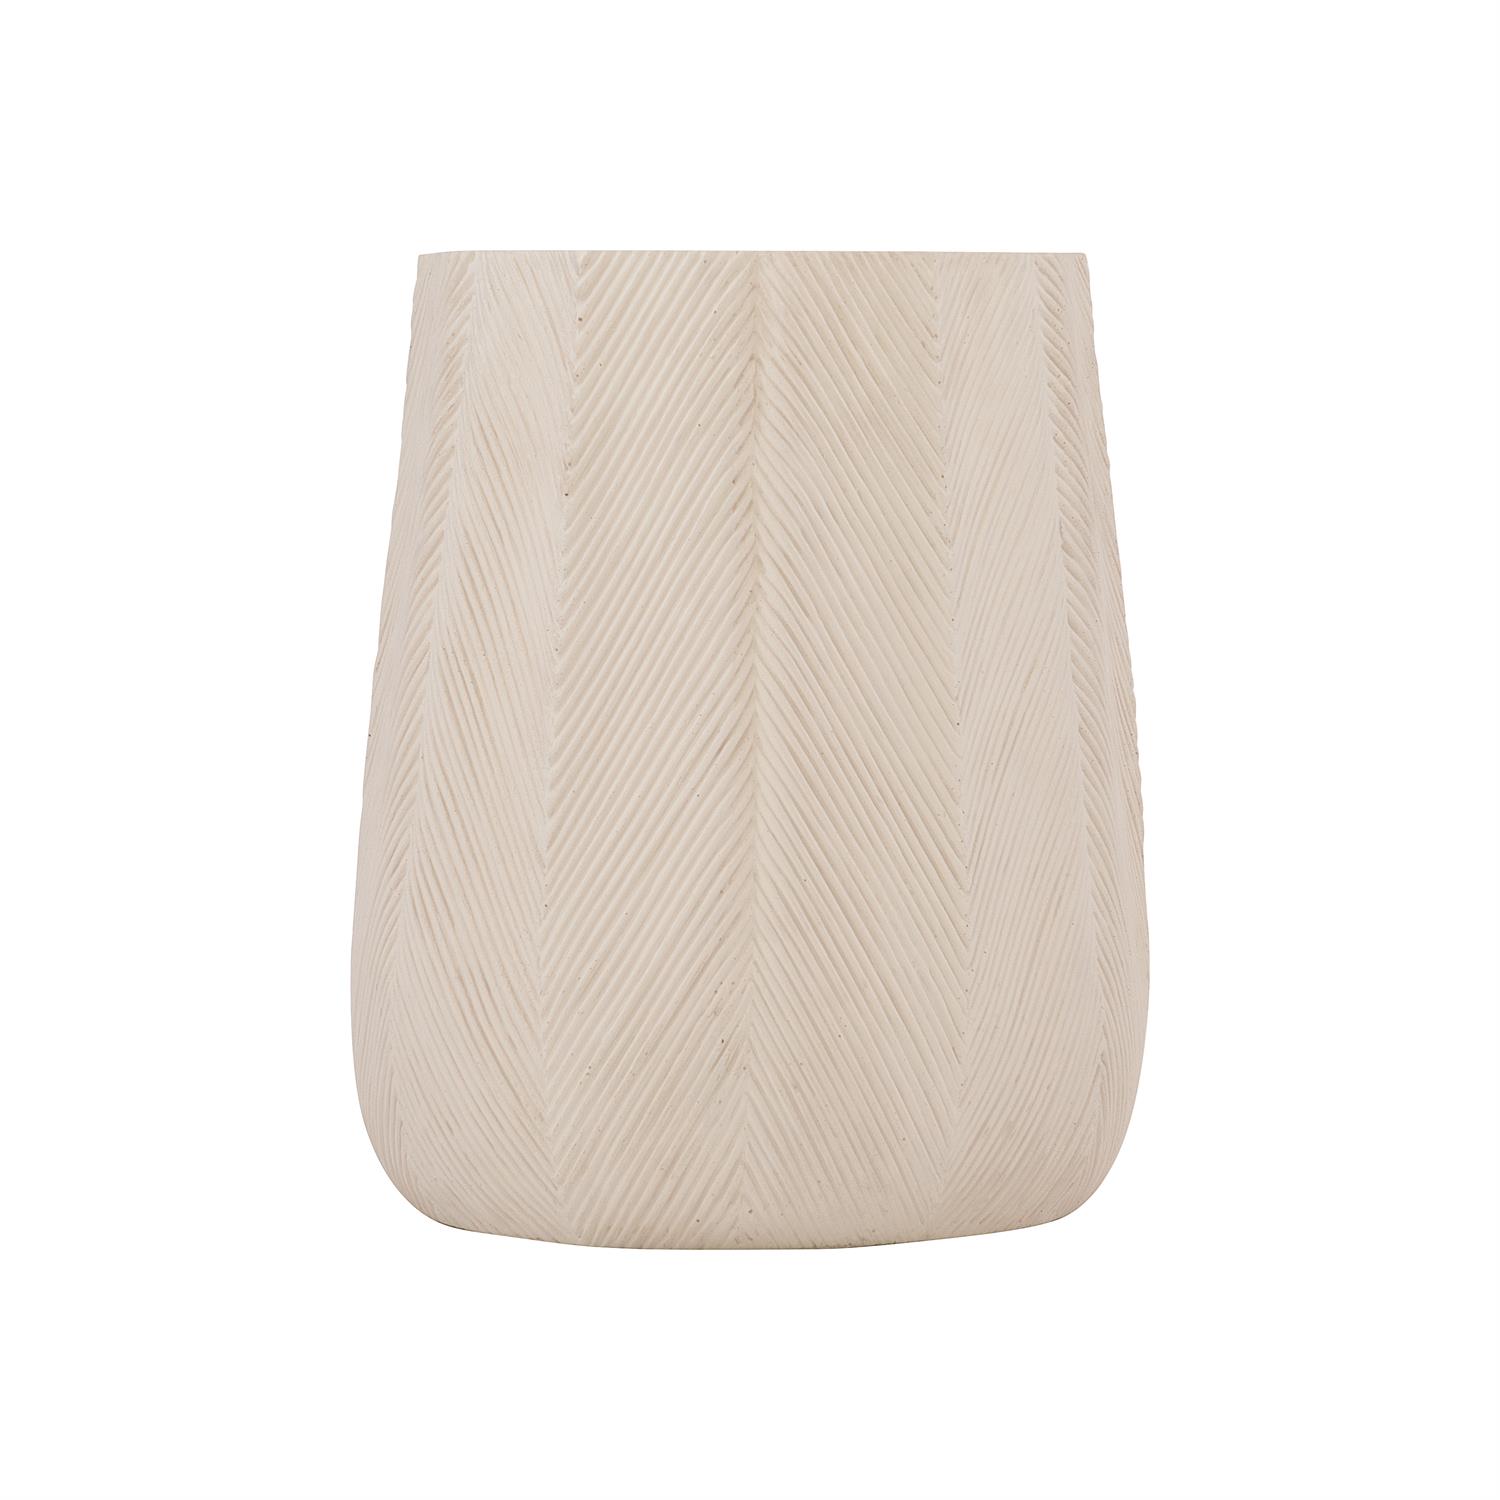 grenada outdoor accent table product image